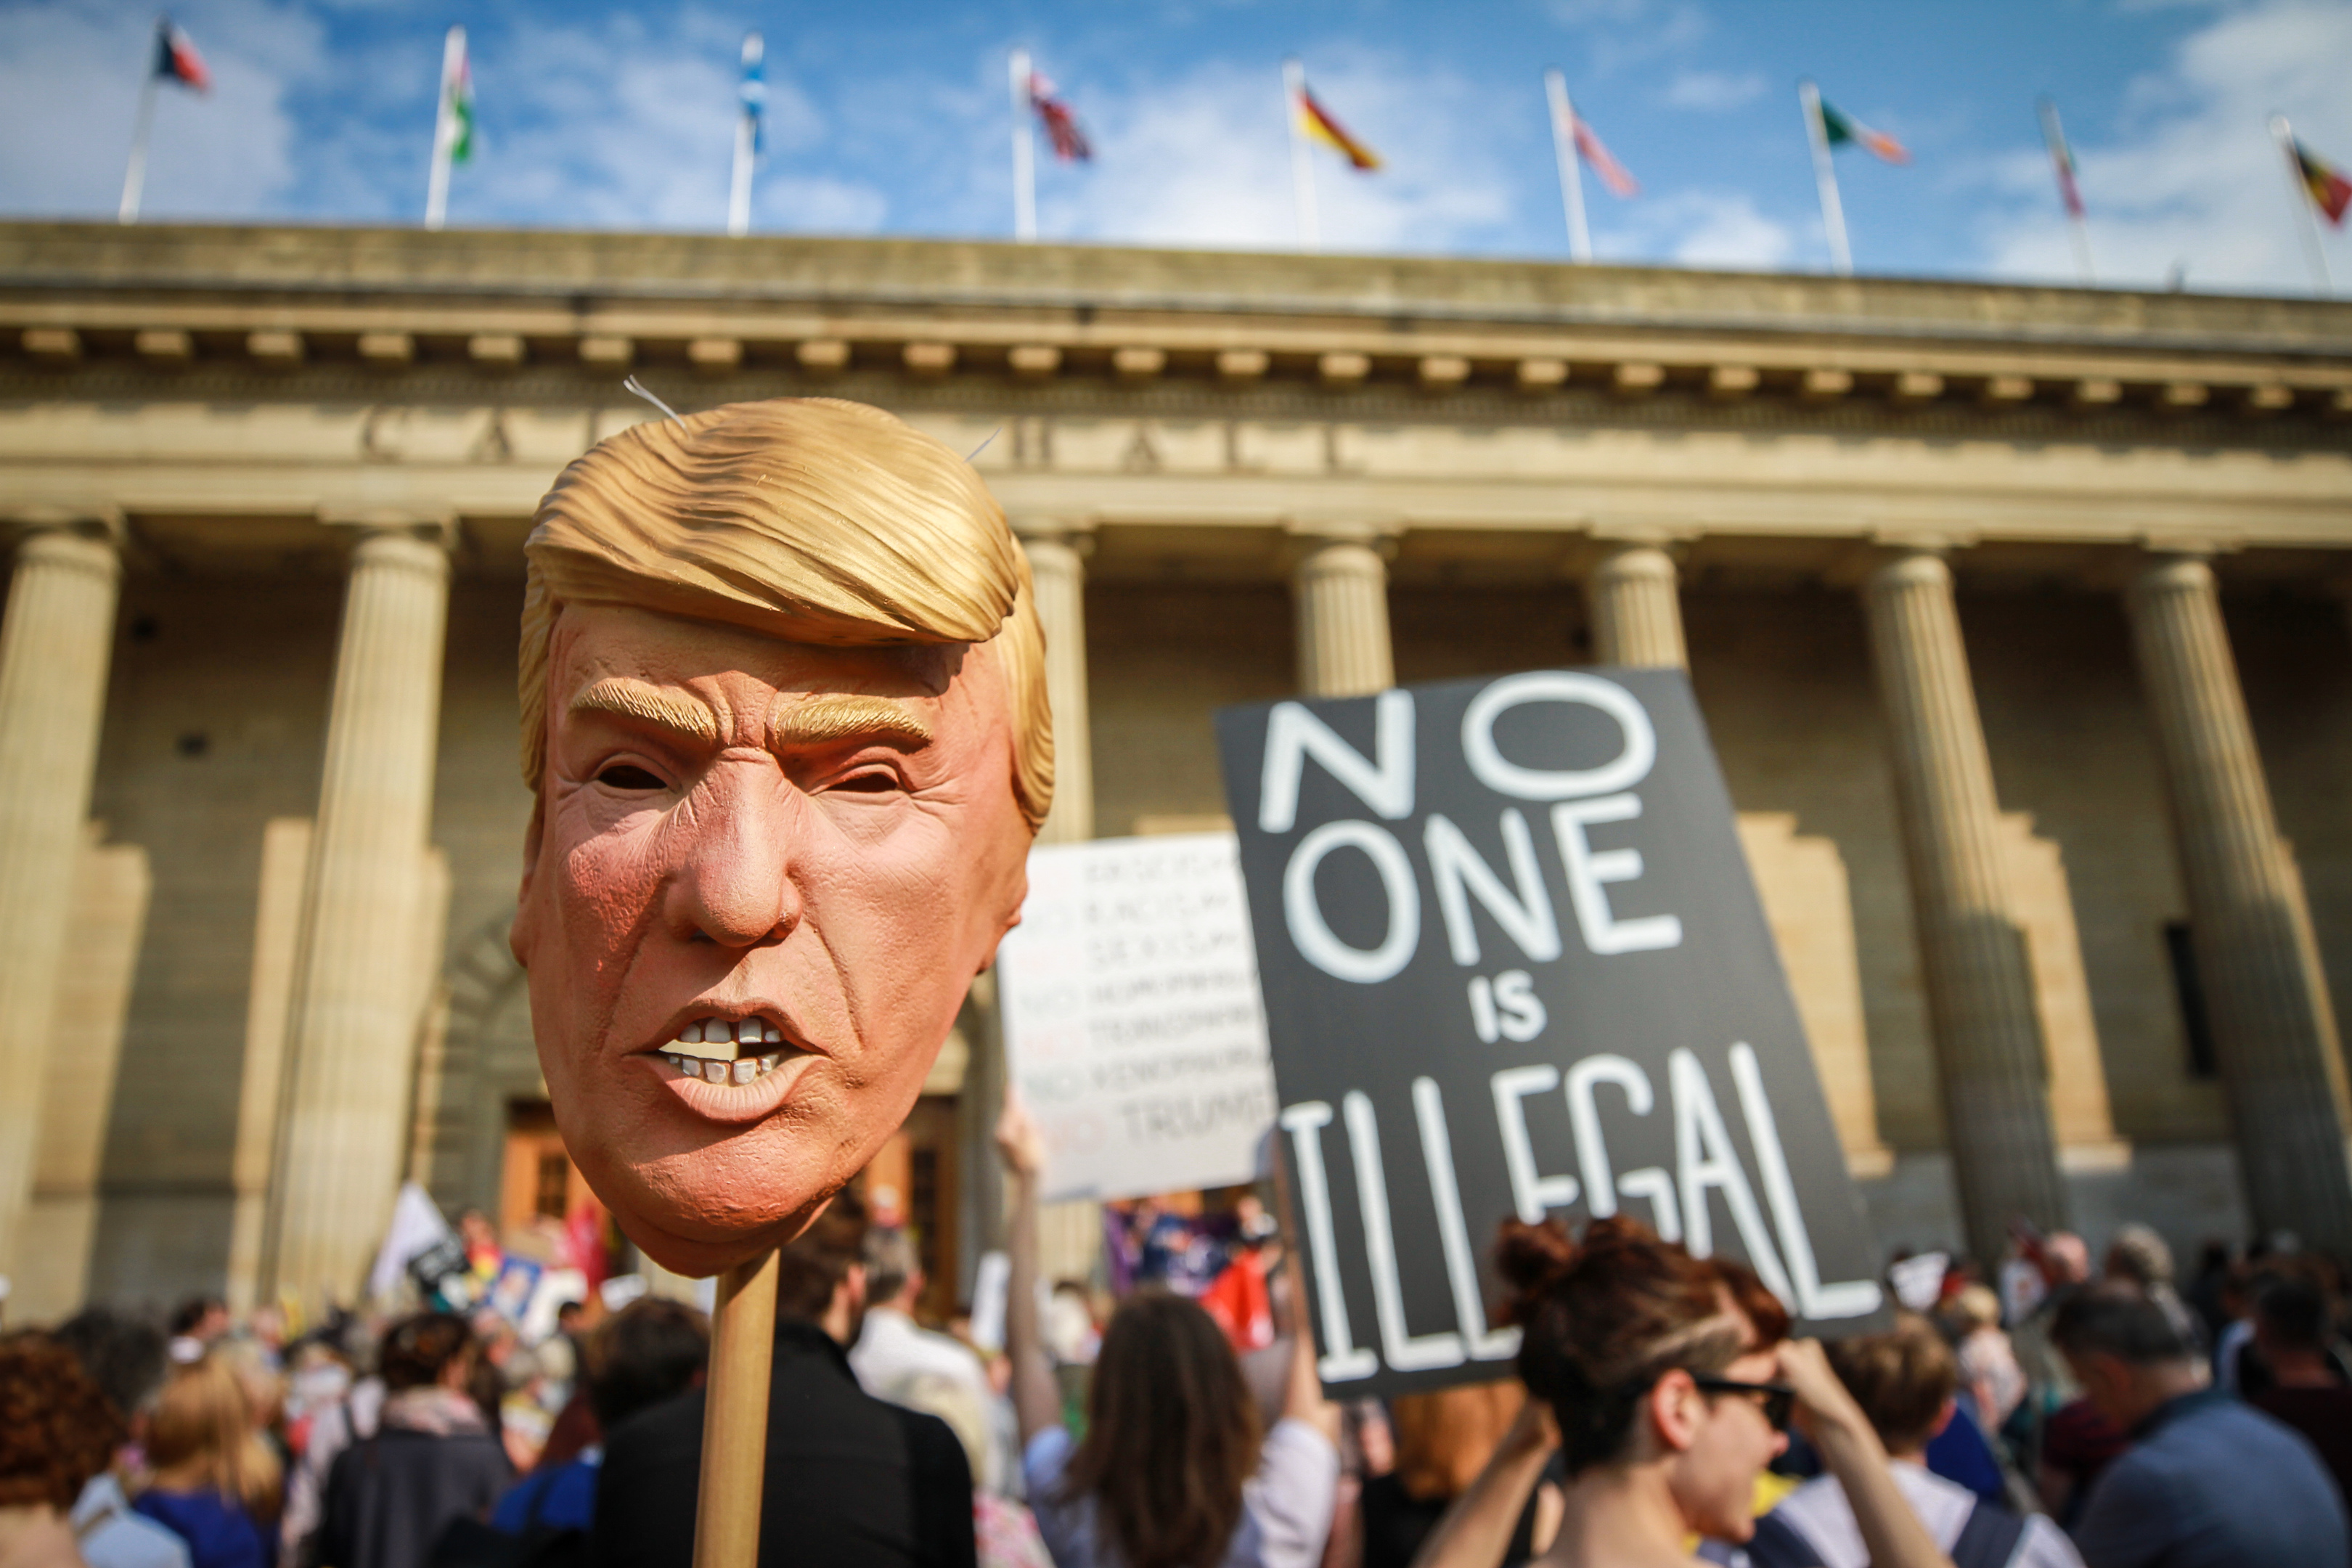 Hundreds of people protested against Donald Trump in Dundee City Square.